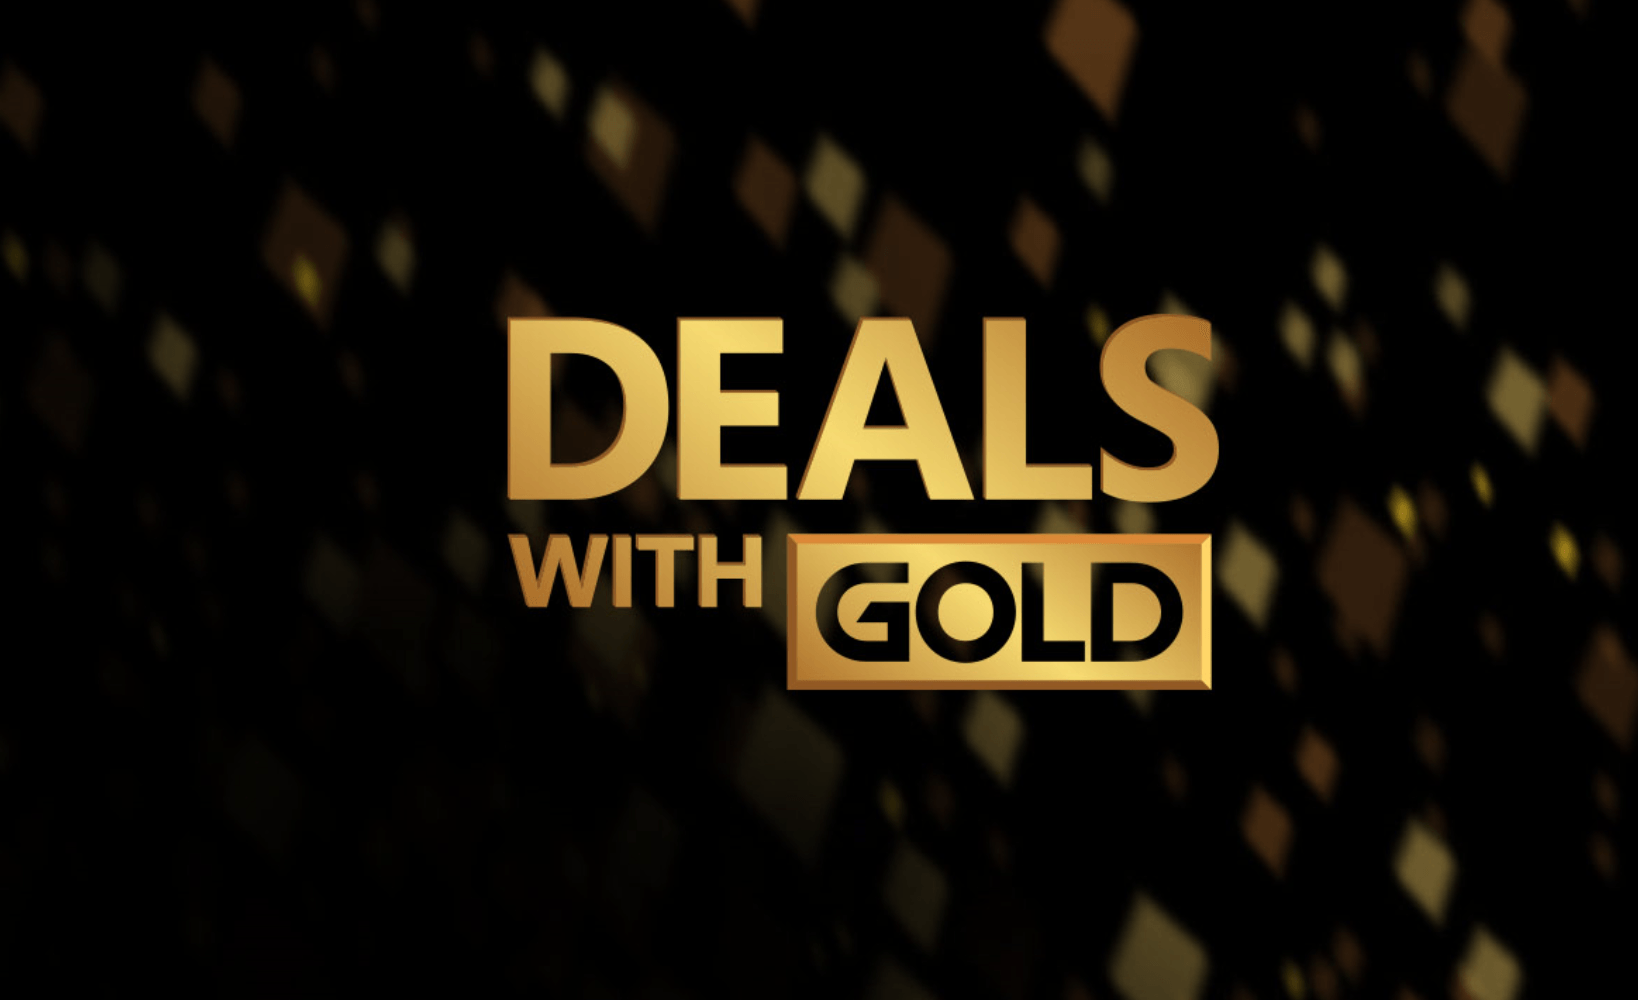 Deals with Gold & Tom Clancy's Franchise Sale - GTA V und HITMAN 2